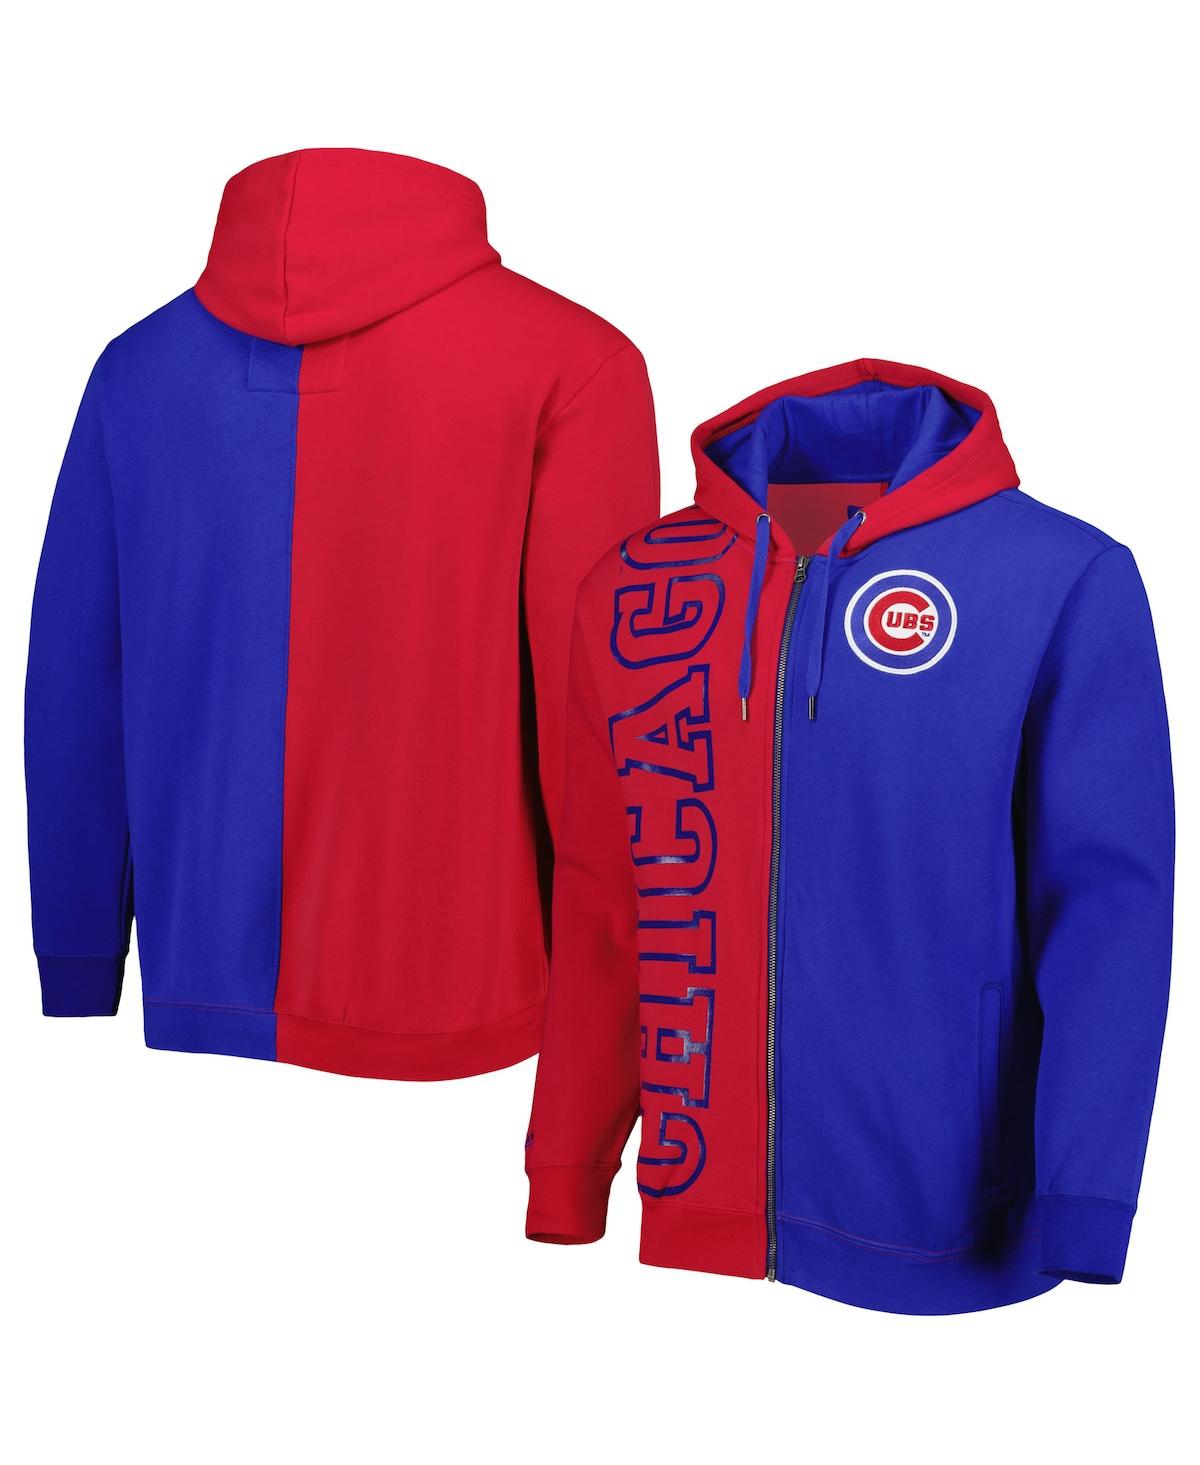 Men's Mitchell & Ness Red, Royal Chicago Cubs Fleece Full-Zip Hoodie - Red, Royal